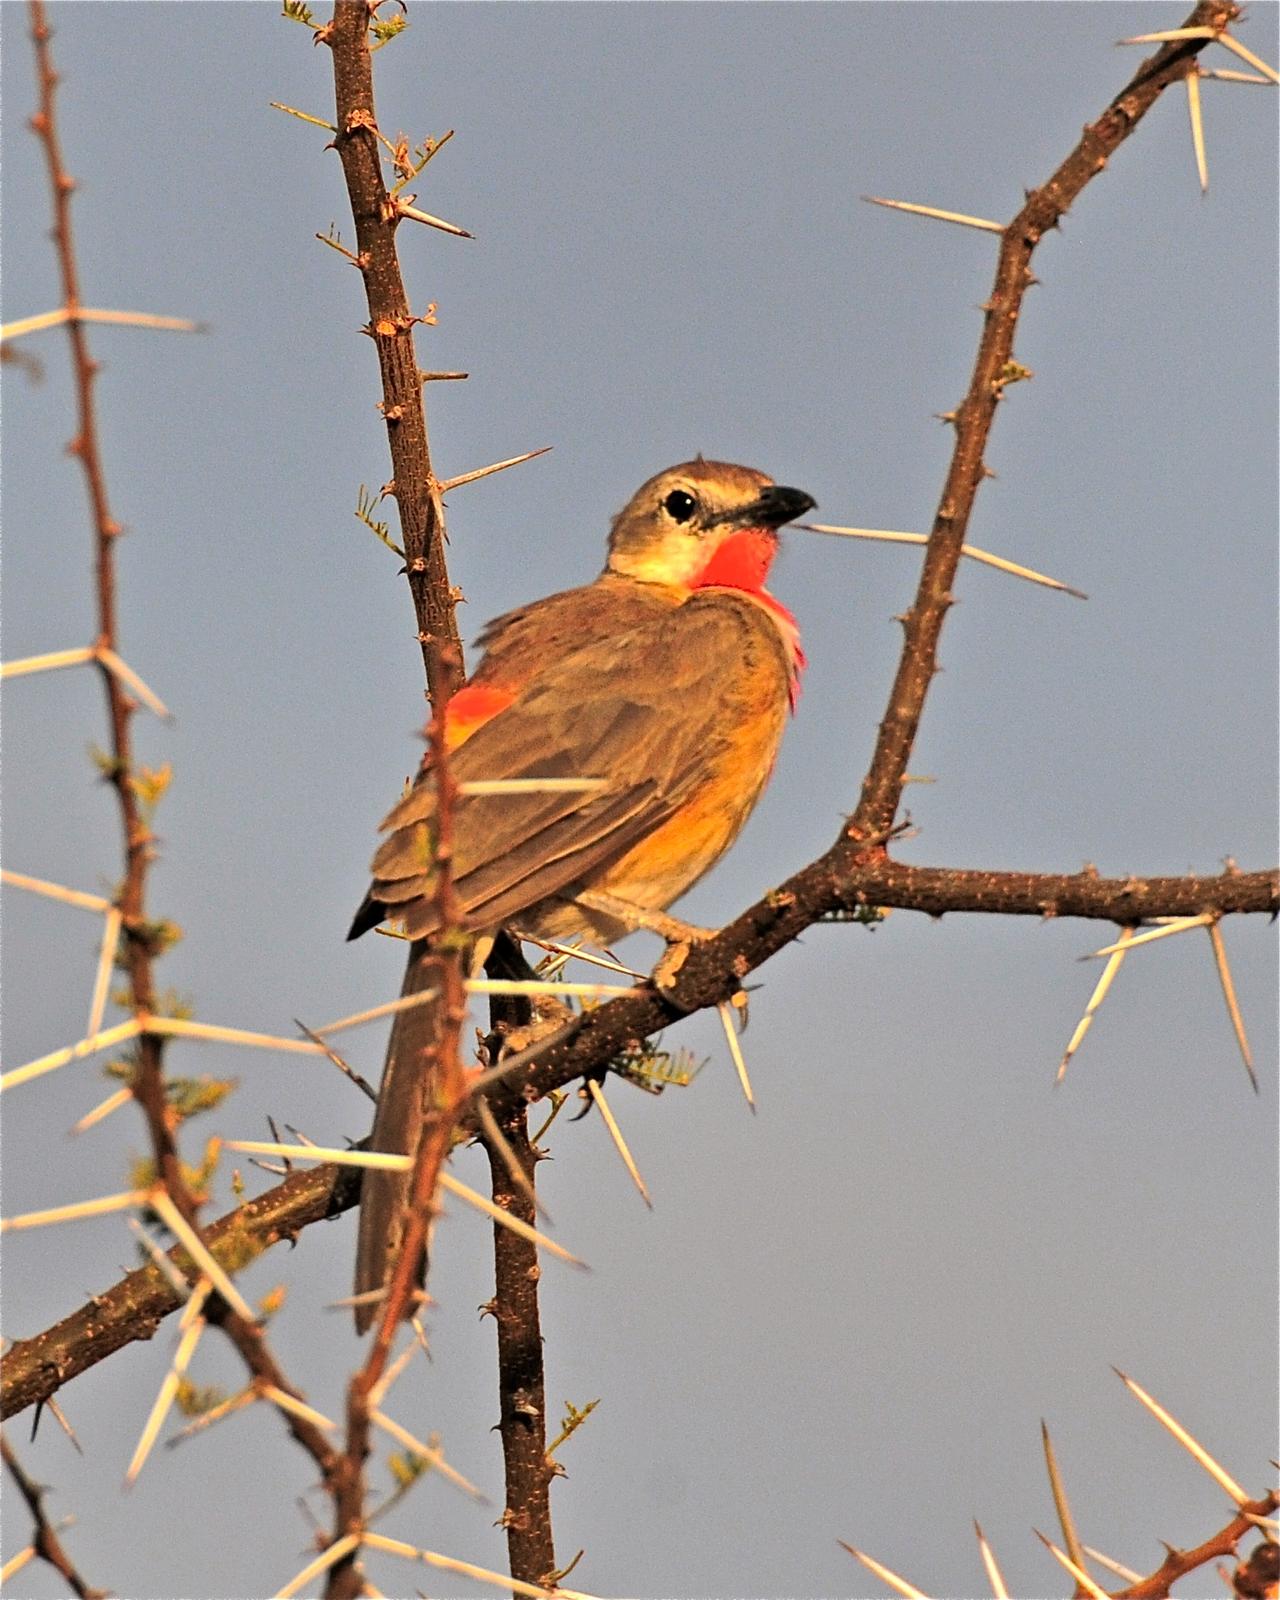 Rosy-patched Bushshrike Photo by Gerald Friesen